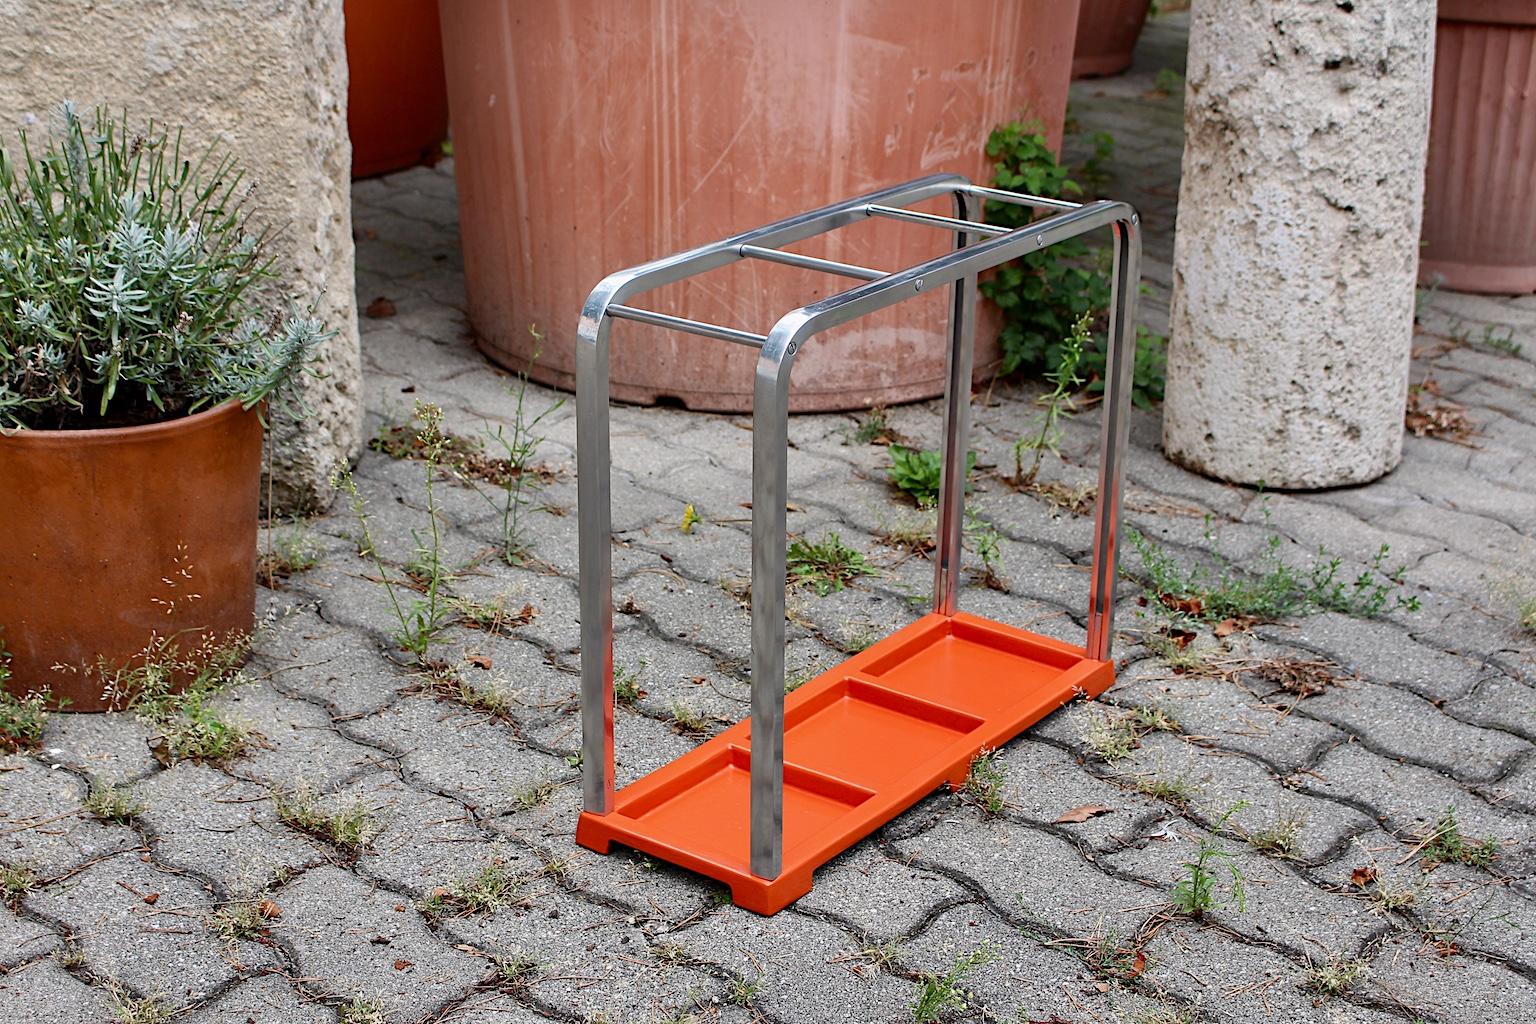 Bauhaus Art Deco Vintage Red Silver Aluminum Umbrella Stand, 1930s, Germany For Sale 13